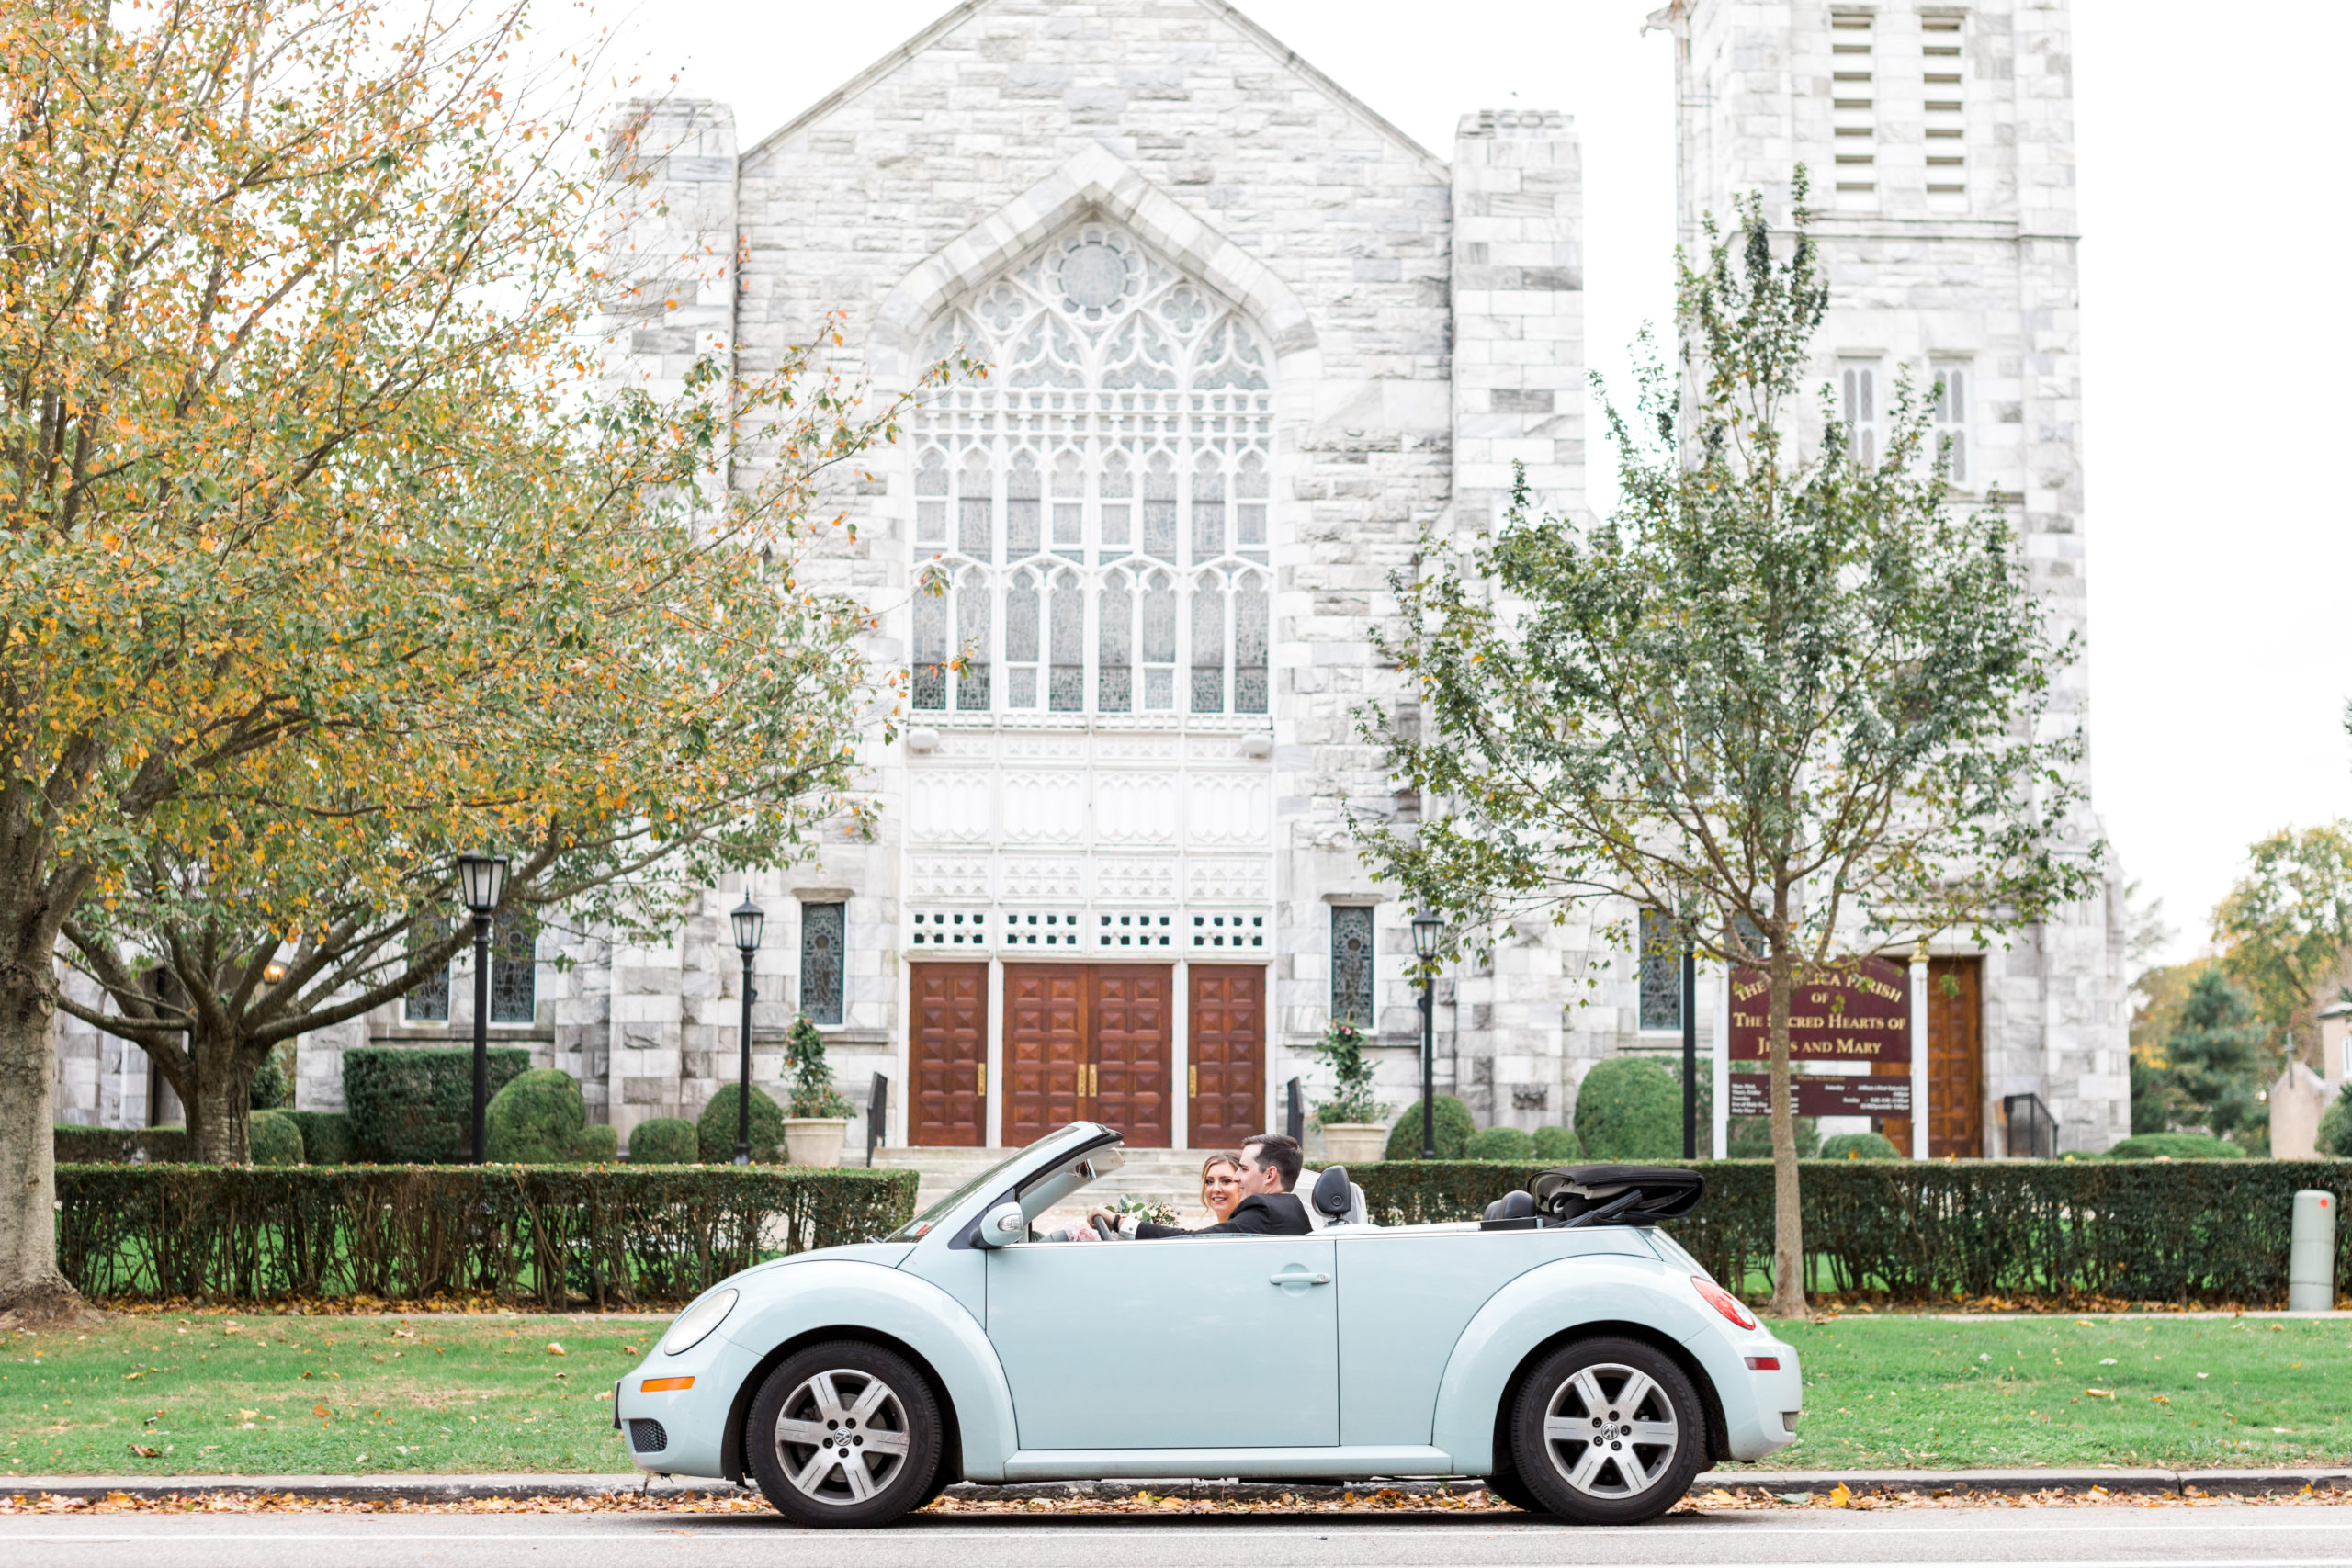 Southampton, NY Bride and Groom in Vintage Car in Front of Cathedral